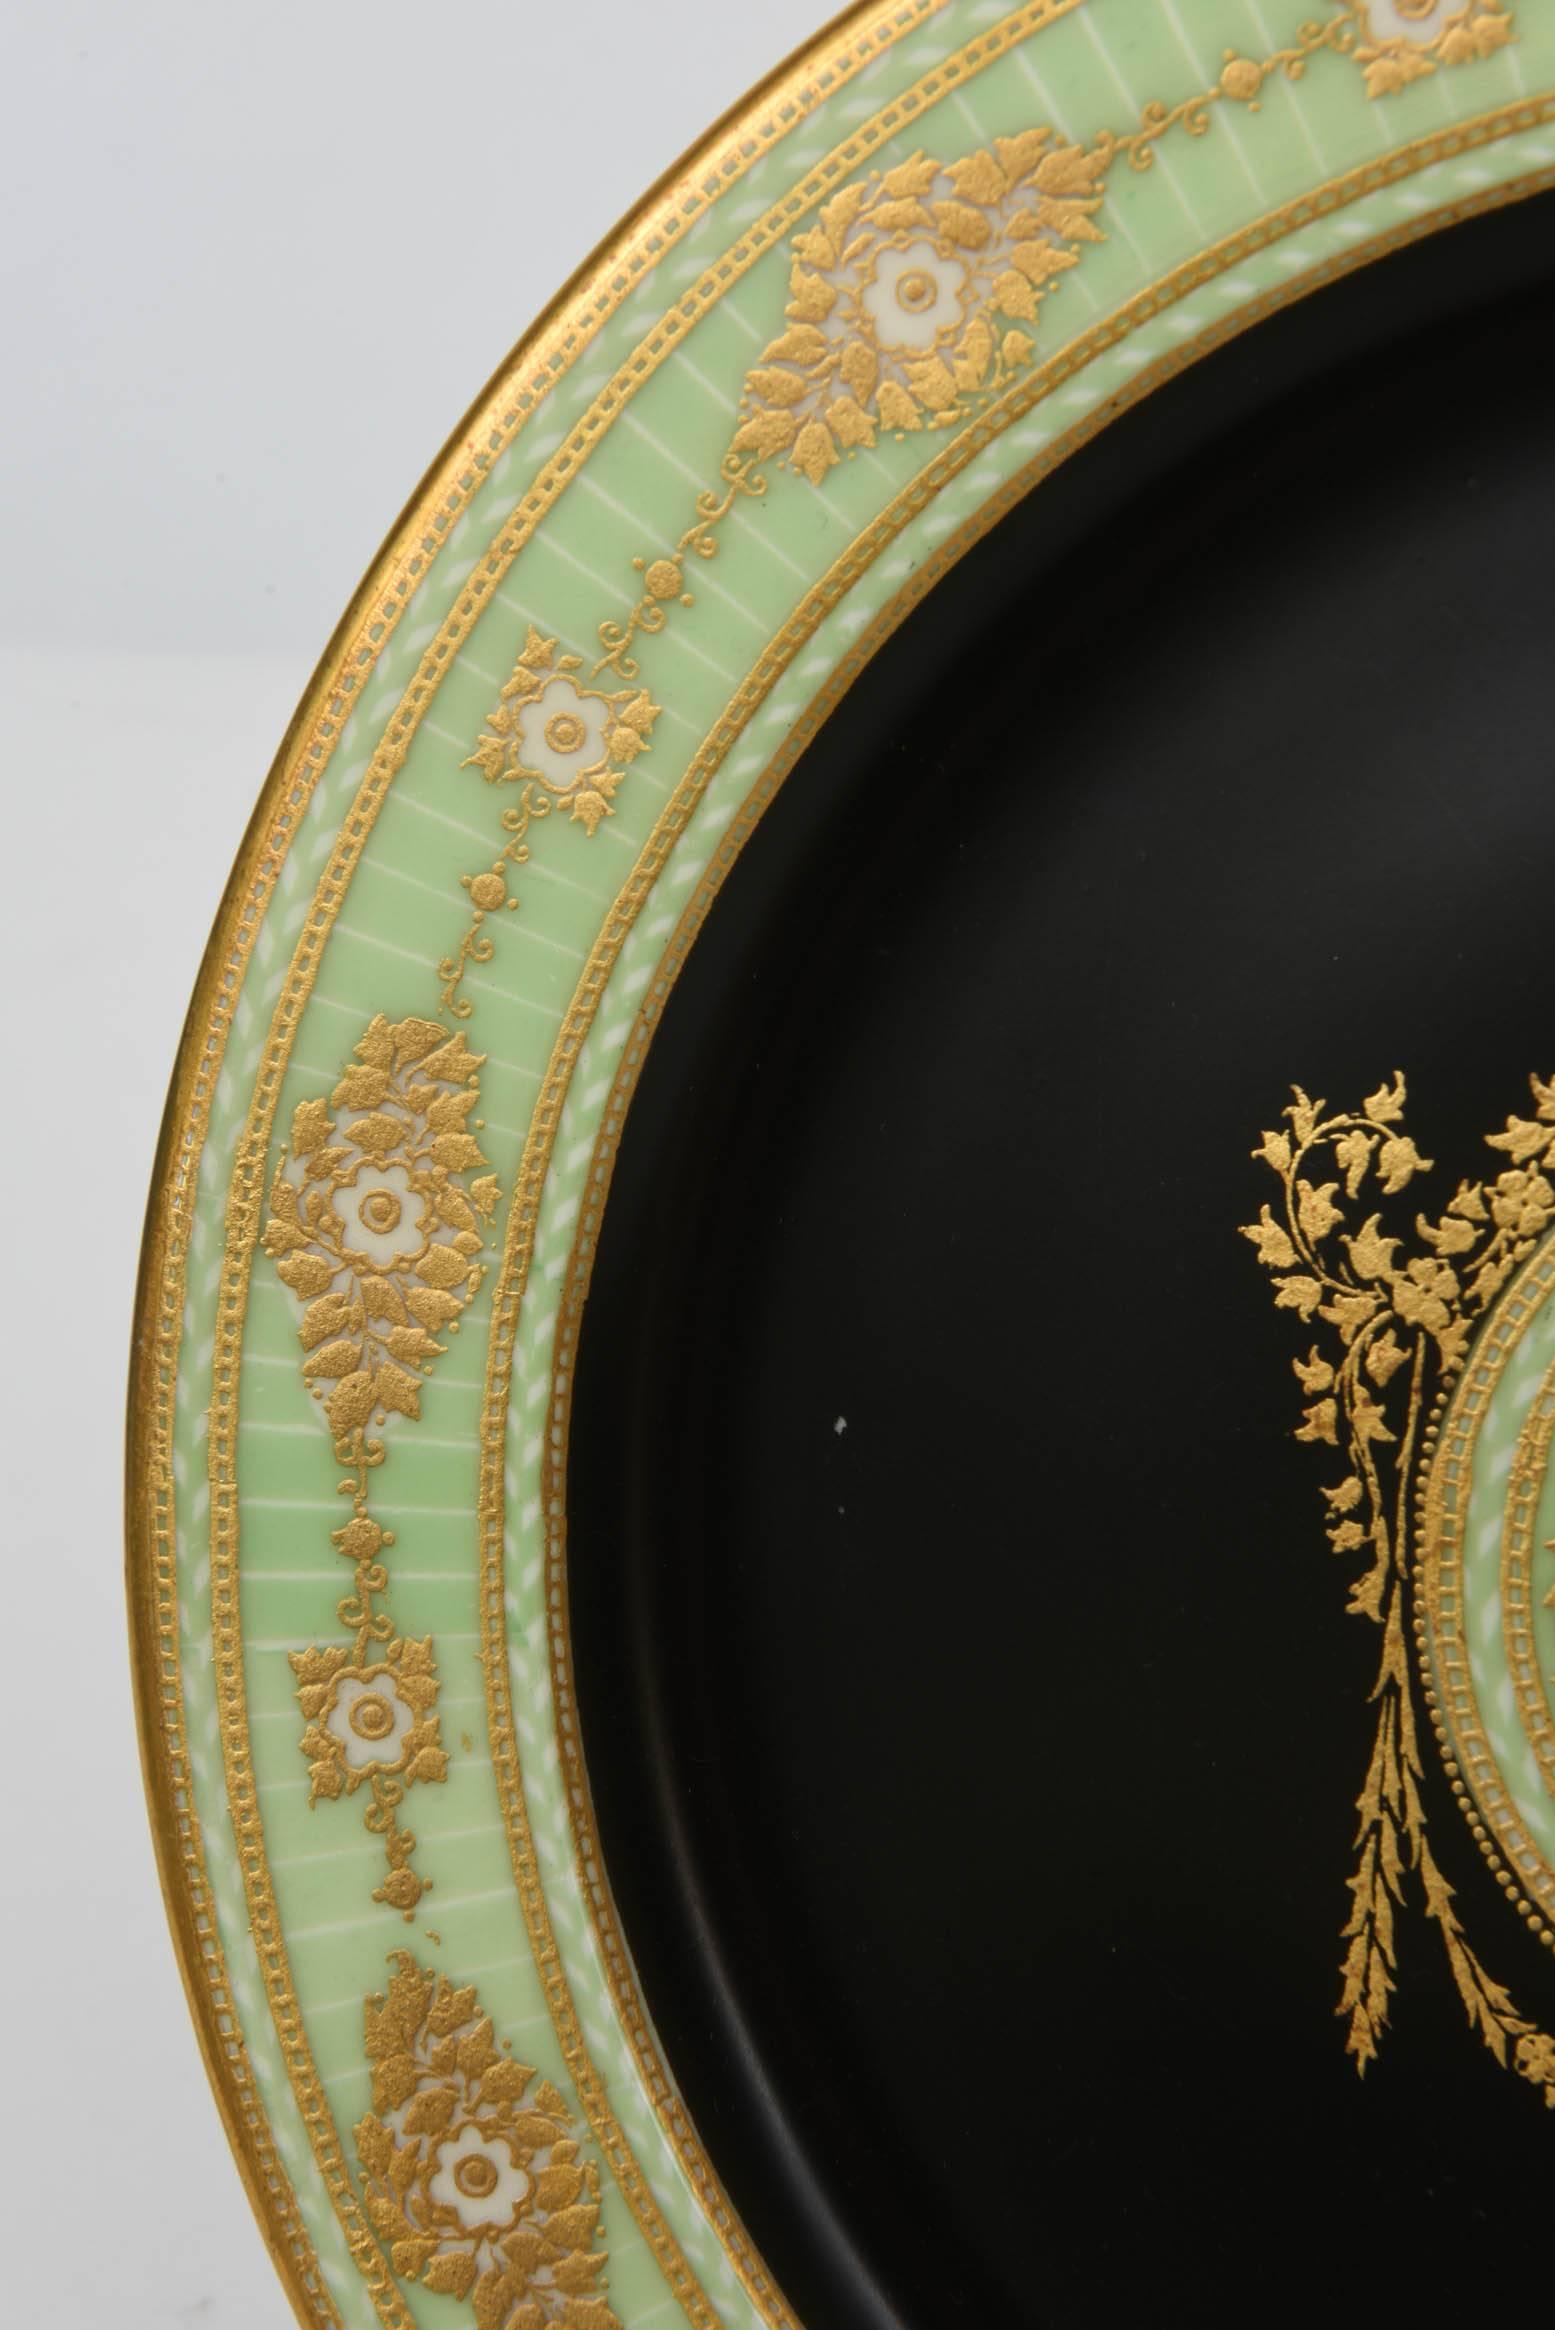 From Royal Worcester England an interesting set of 12 plates that feature a centre medallion with gilt foliate design through out. In addition to making a great first course impression or dessert plate, they will look stunning in your cabinet